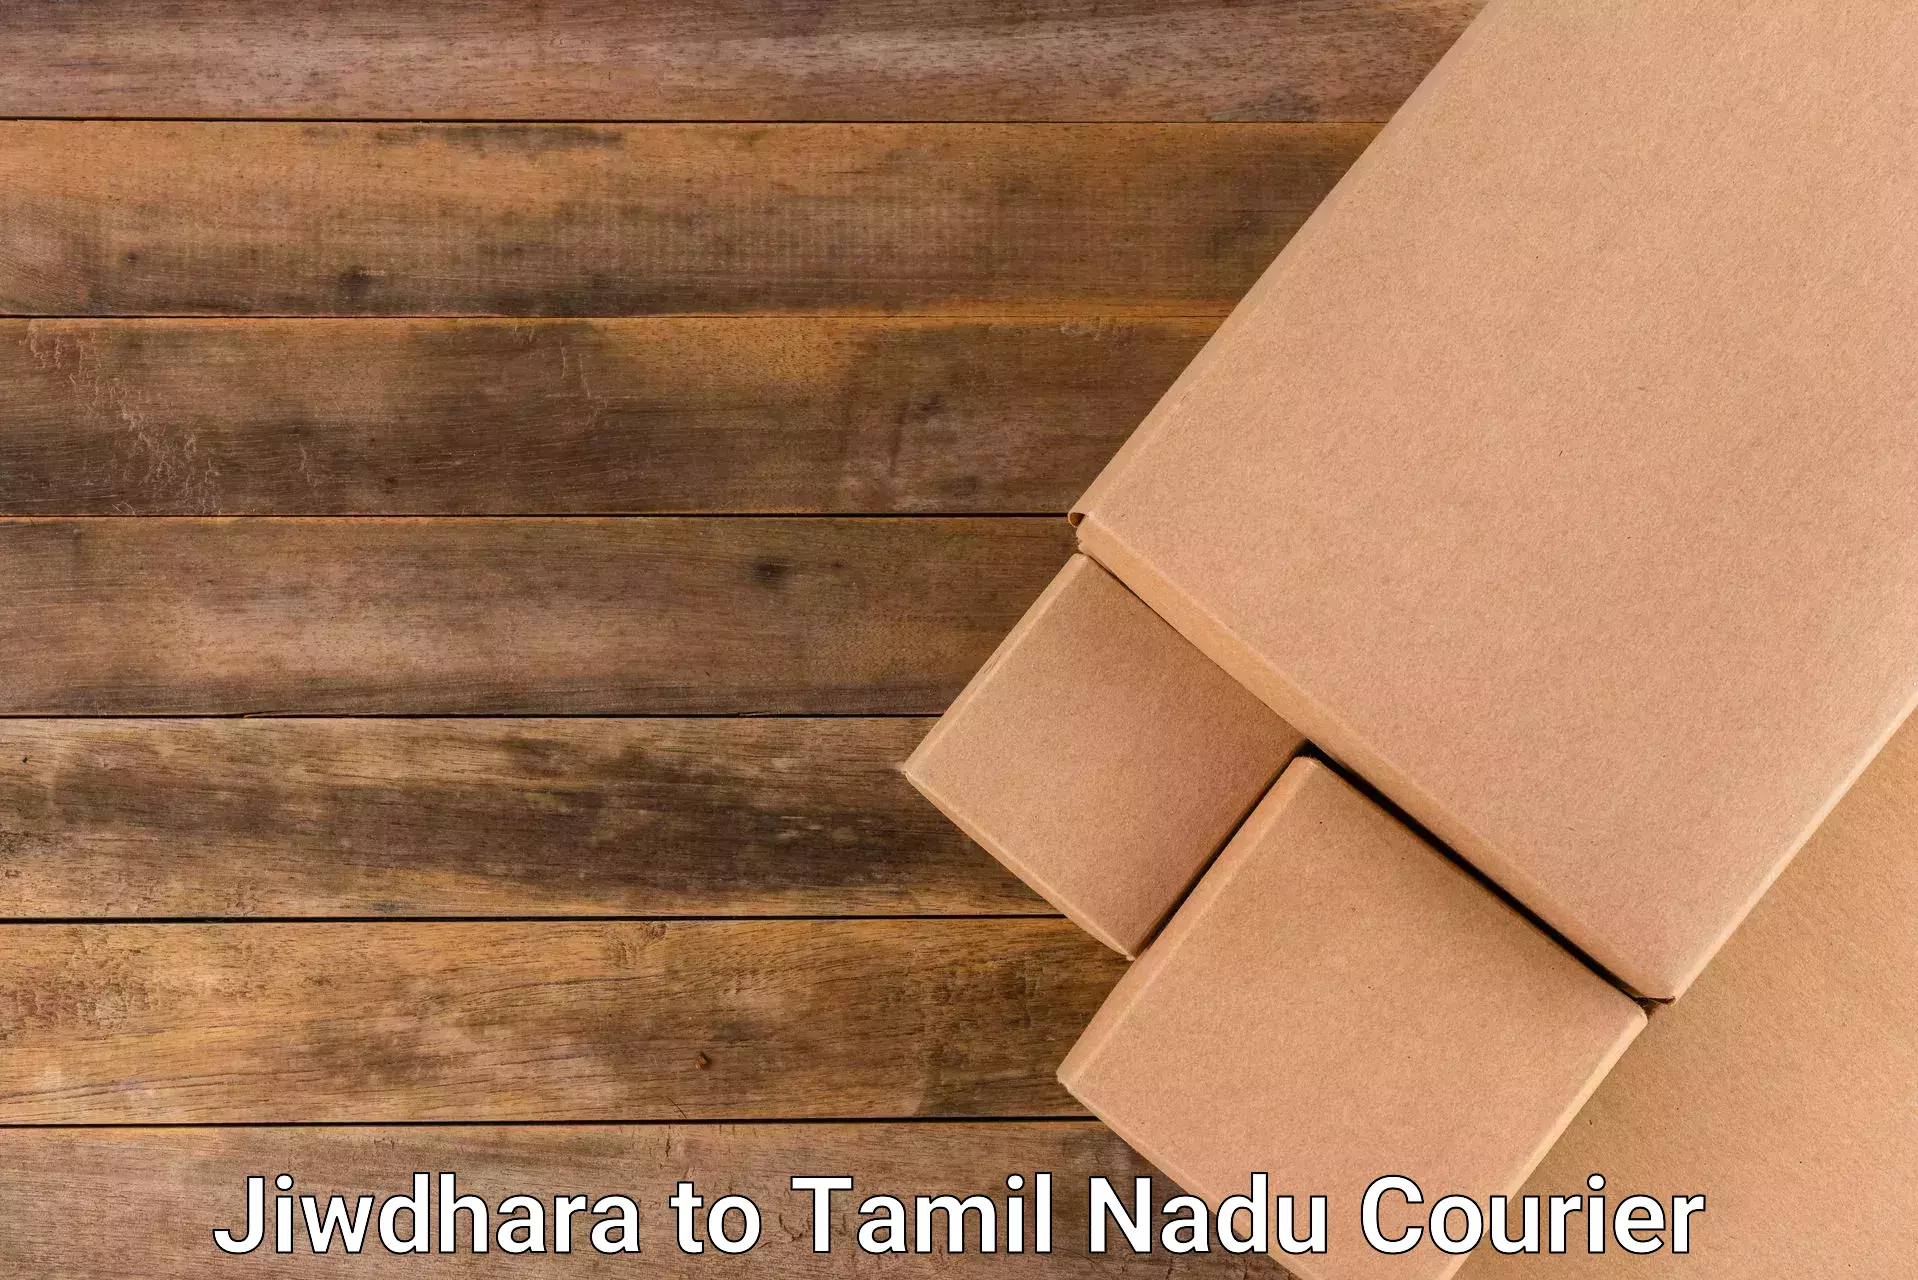 Parcel delivery automation Jiwdhara to Chennai Port